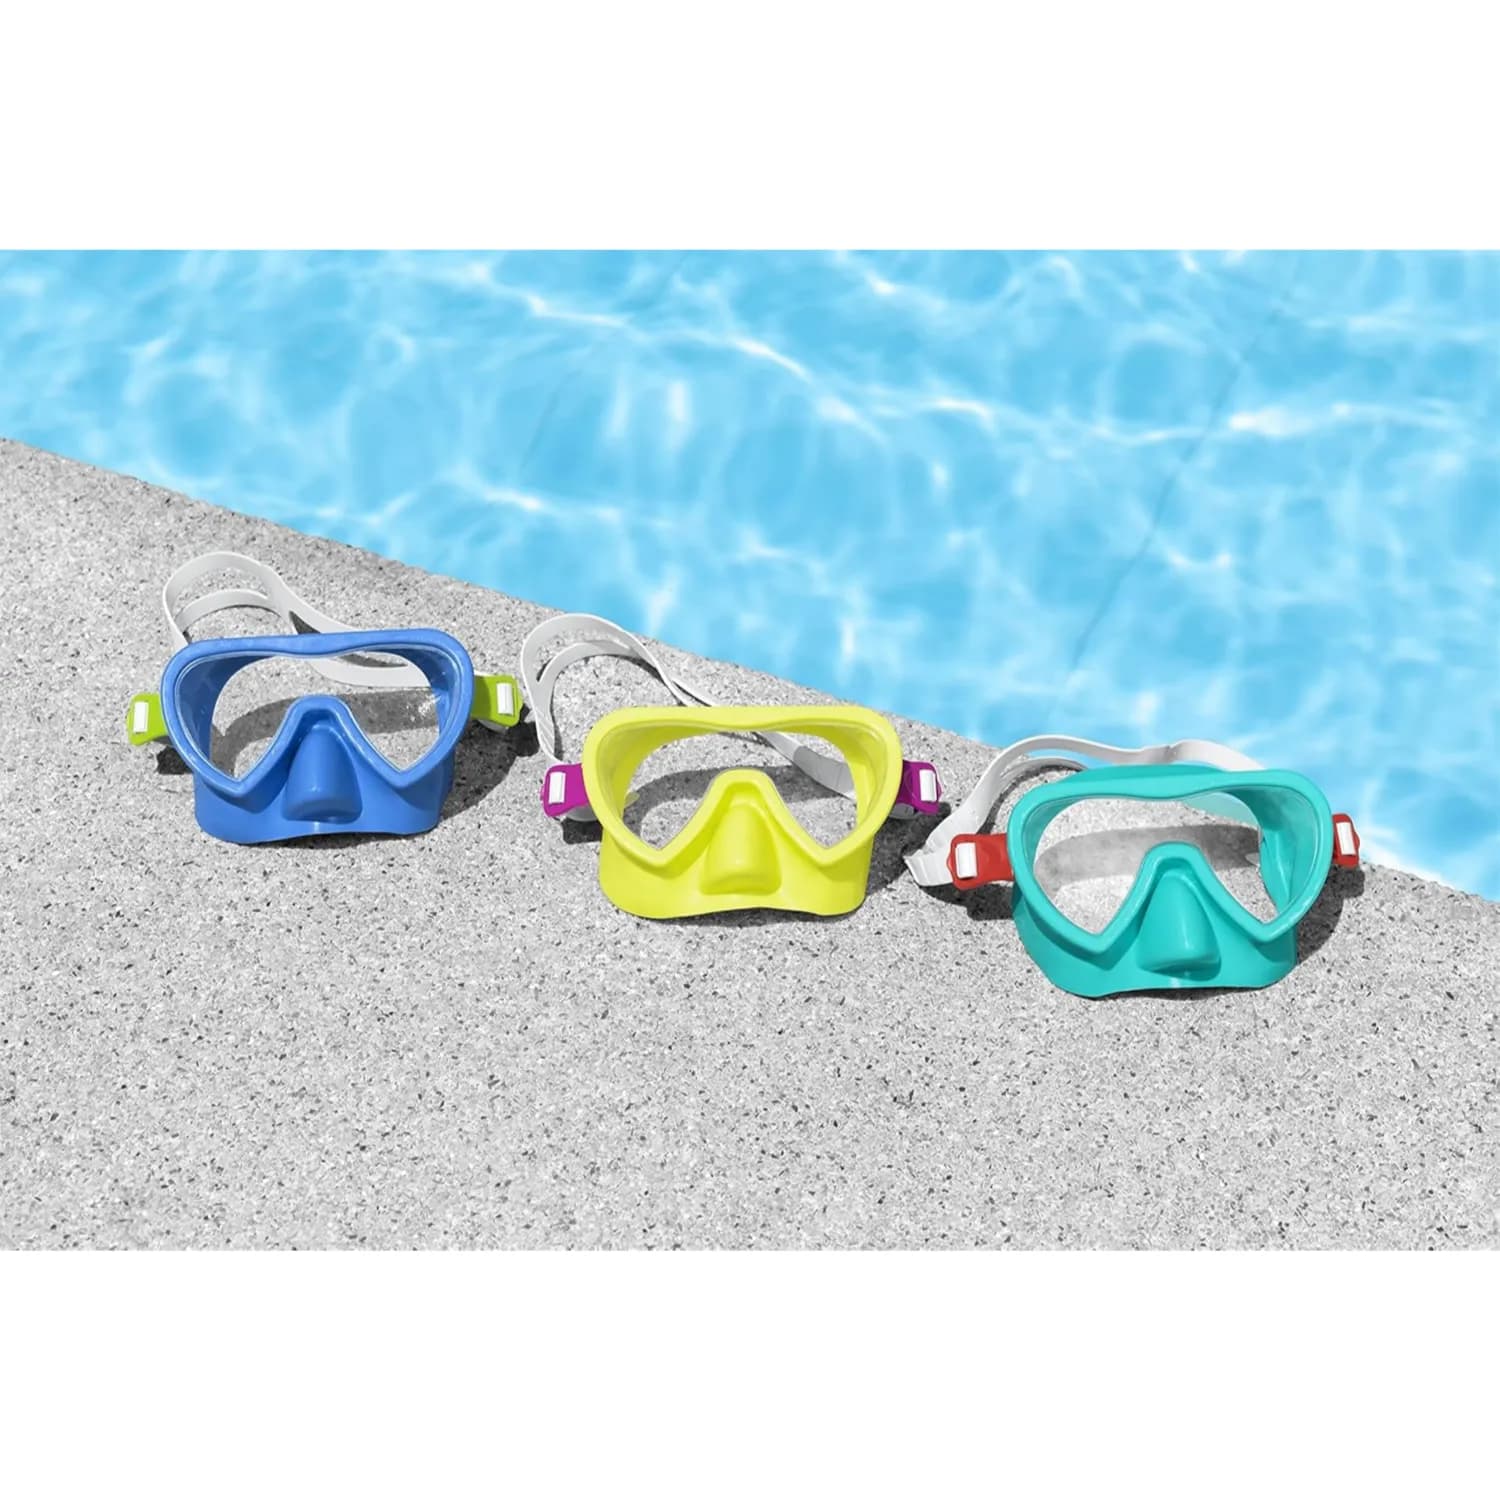 Bestway Guppy Children's Diving Mask - Goggles For 3+ Years - 1 Piece Set - POLT168